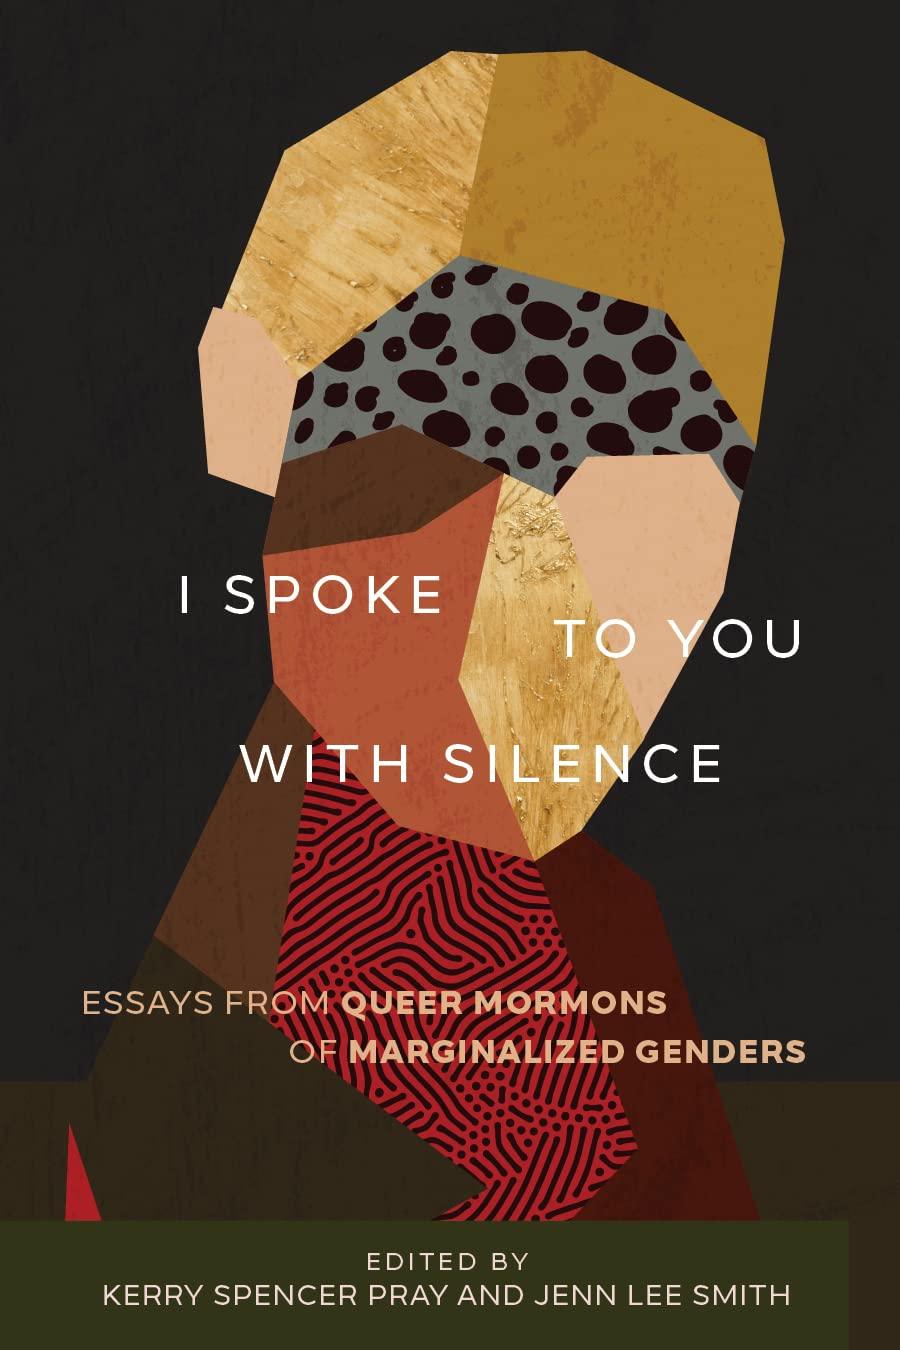 I Spoke to You with Silence: Essays from Queer Mormons of Marginalized Genders - ShopQueer.co